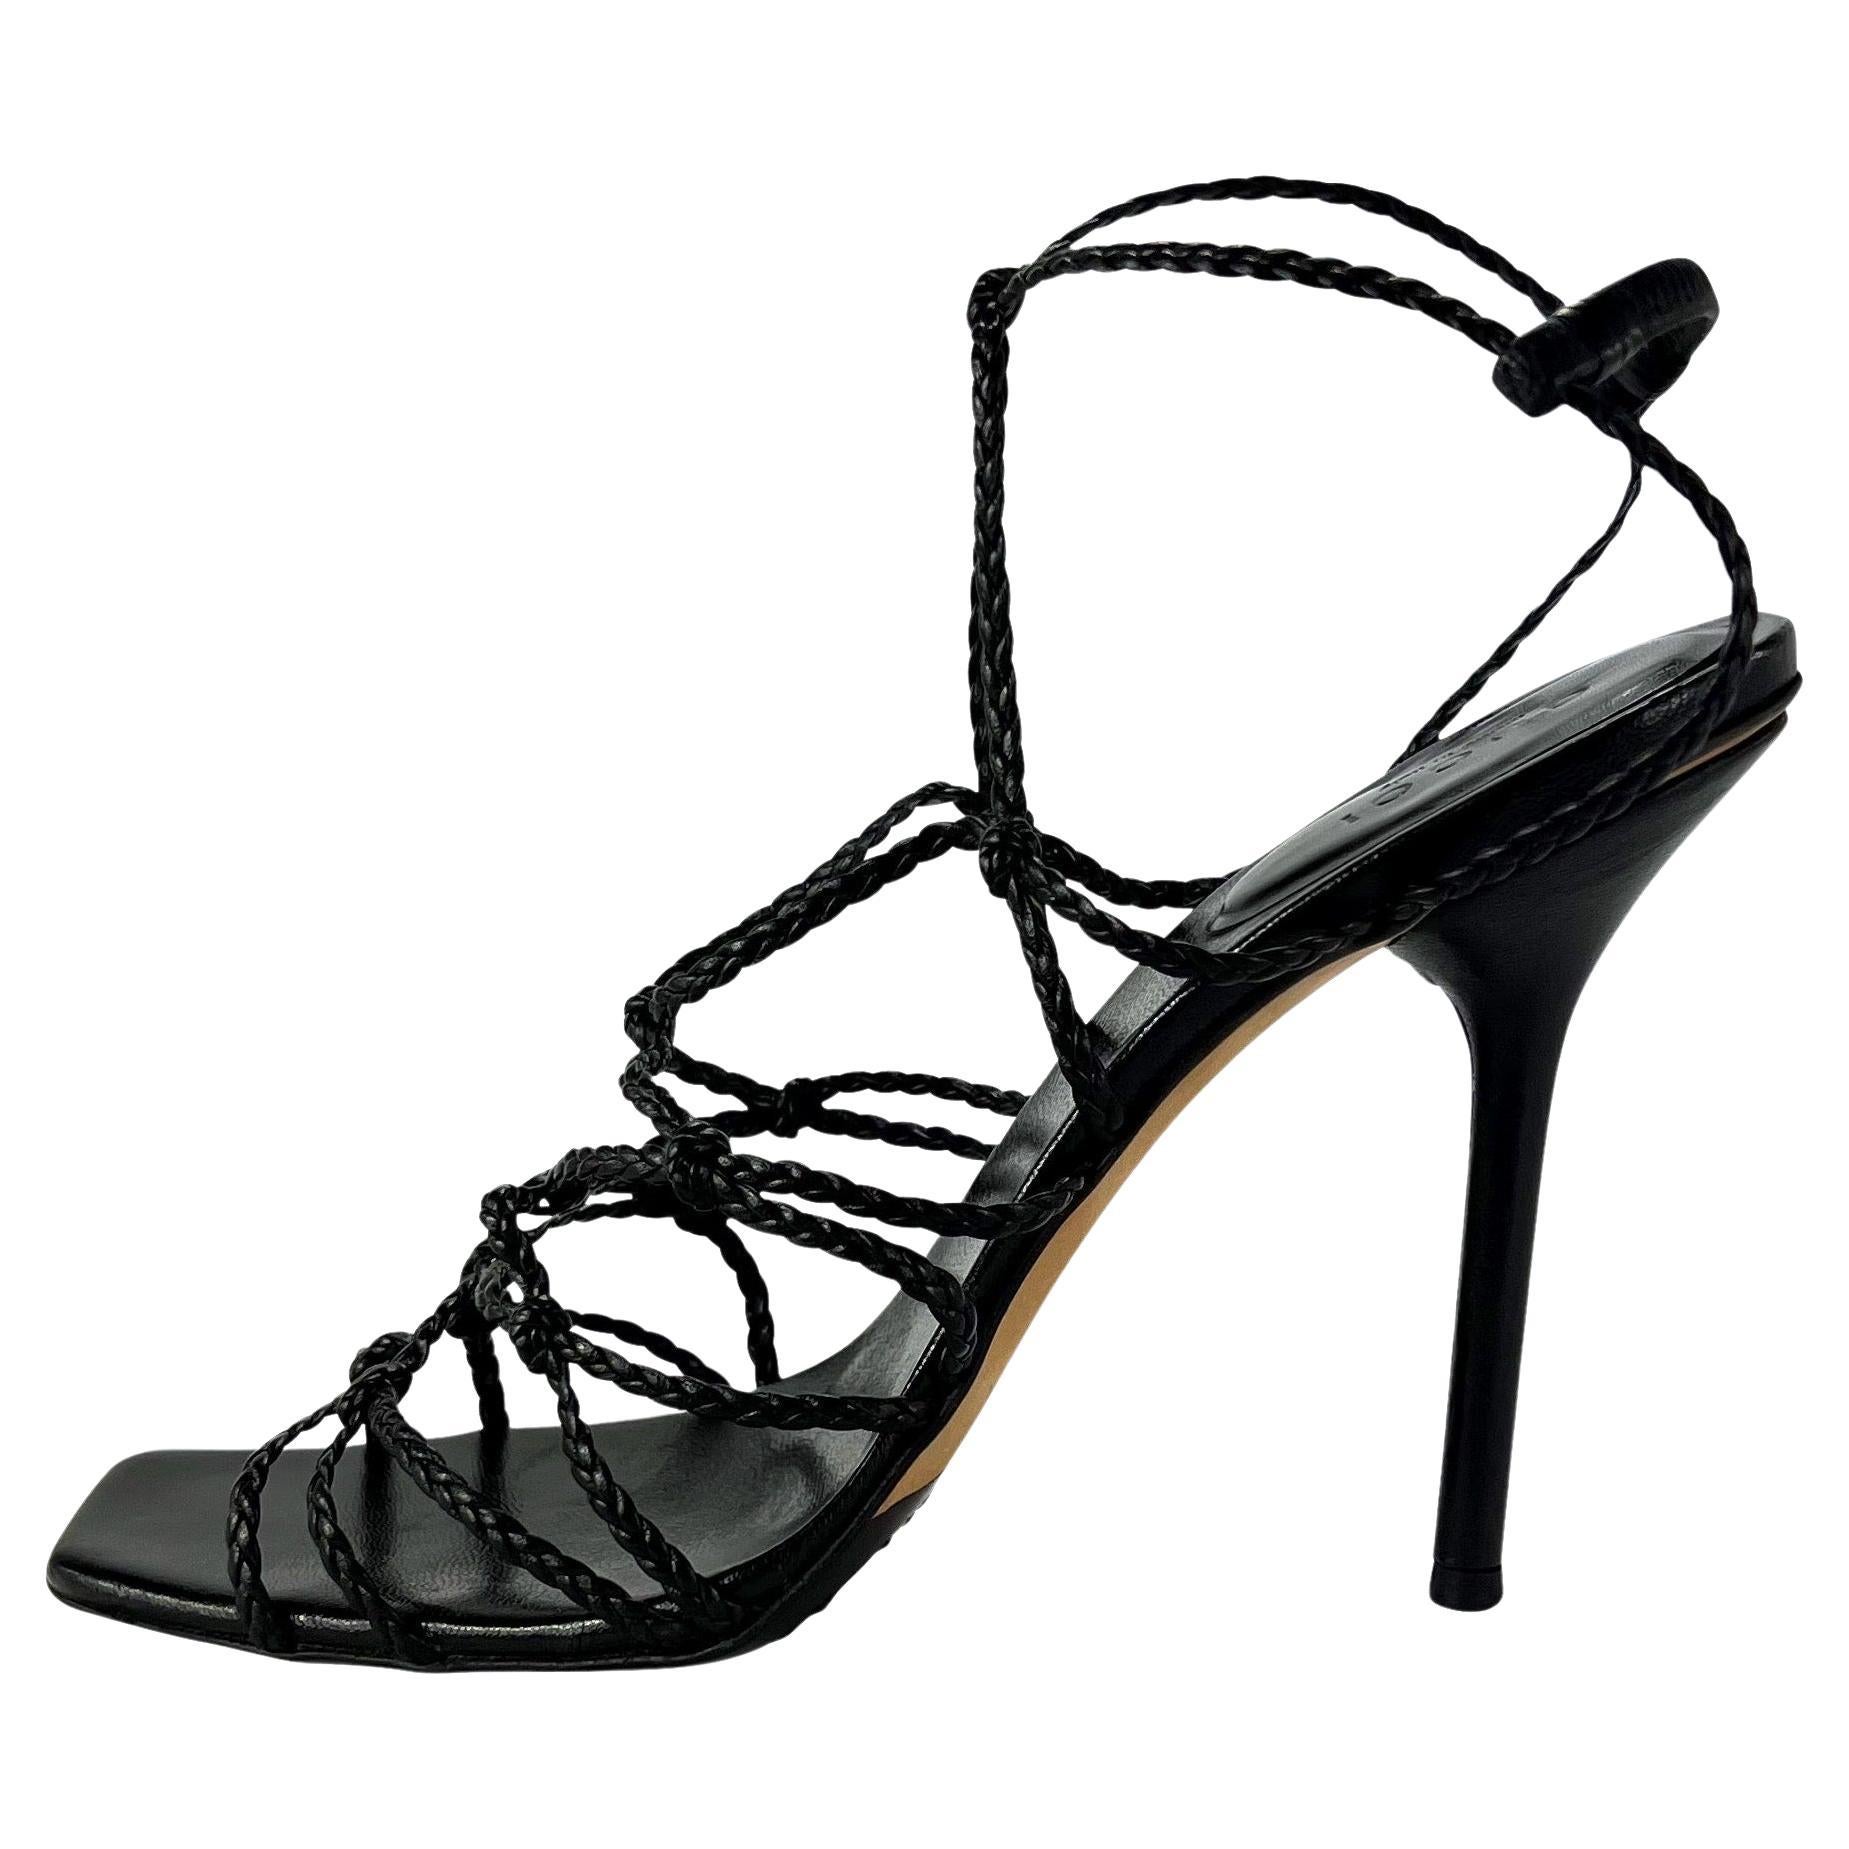 F/W 2002 Gucci by Tom Ford Black Braided Leather Strap Heels Size 7.5 B For Sale